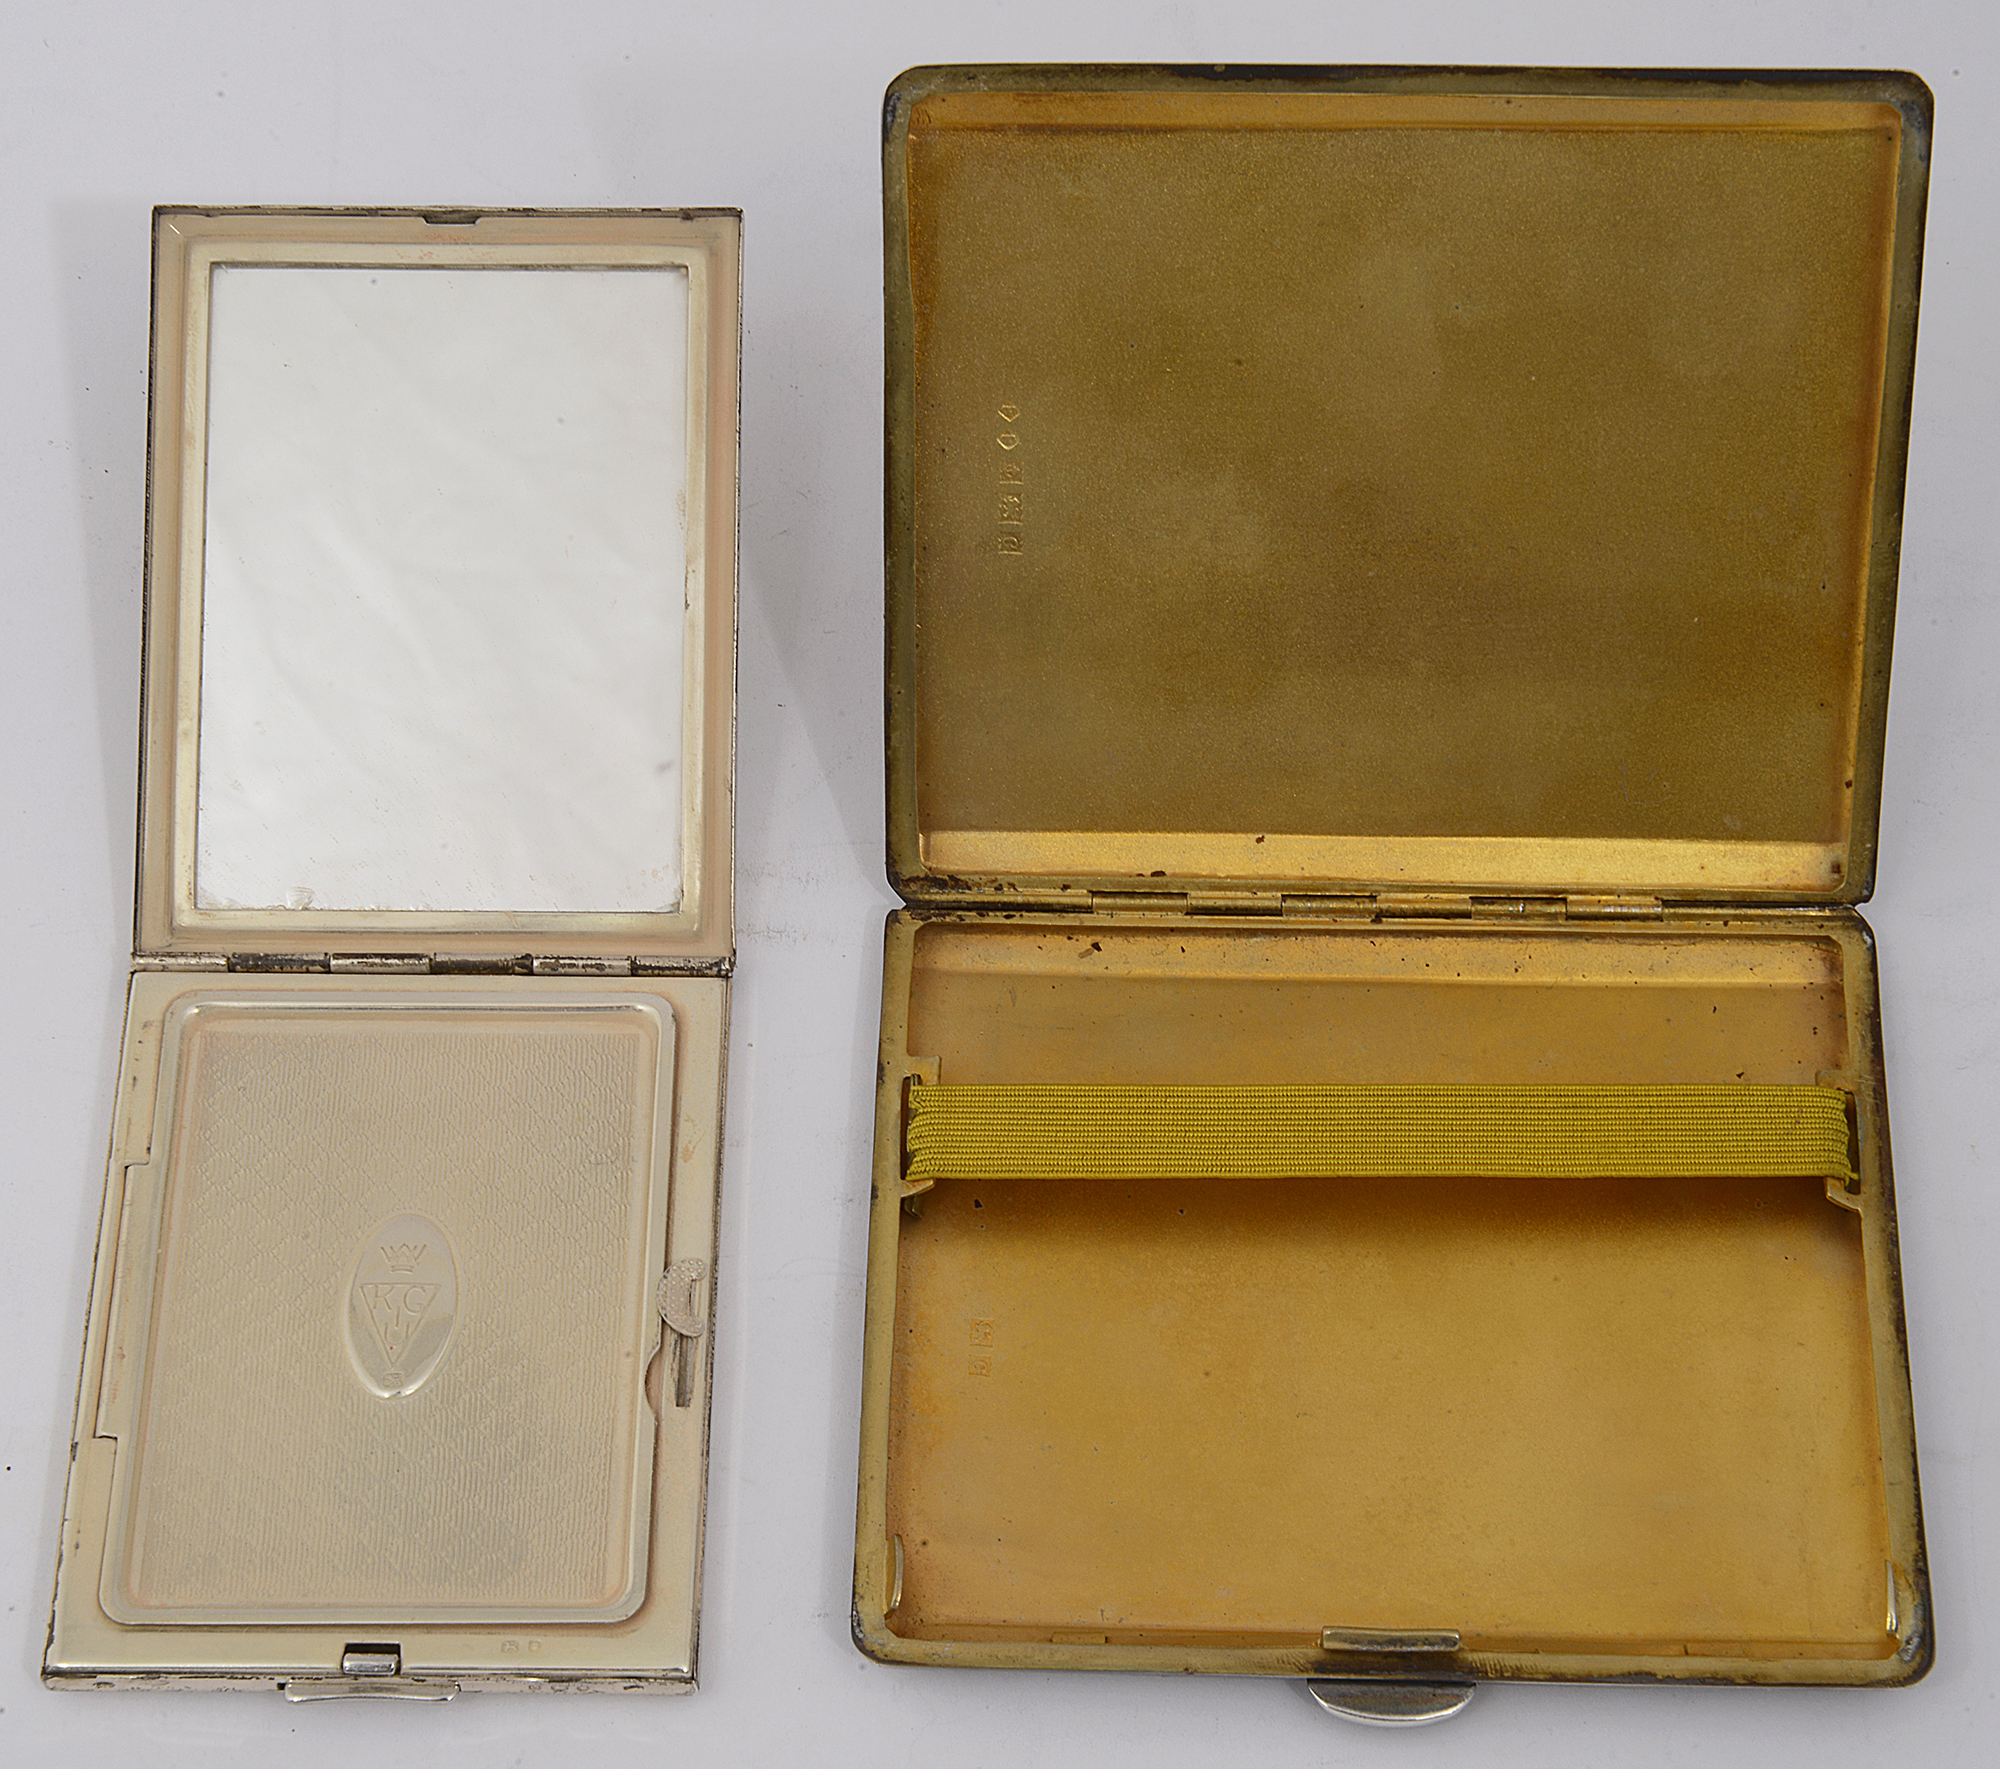 A silver Kigu lady's powder compact and an engine turned cigarette case - Image 2 of 2